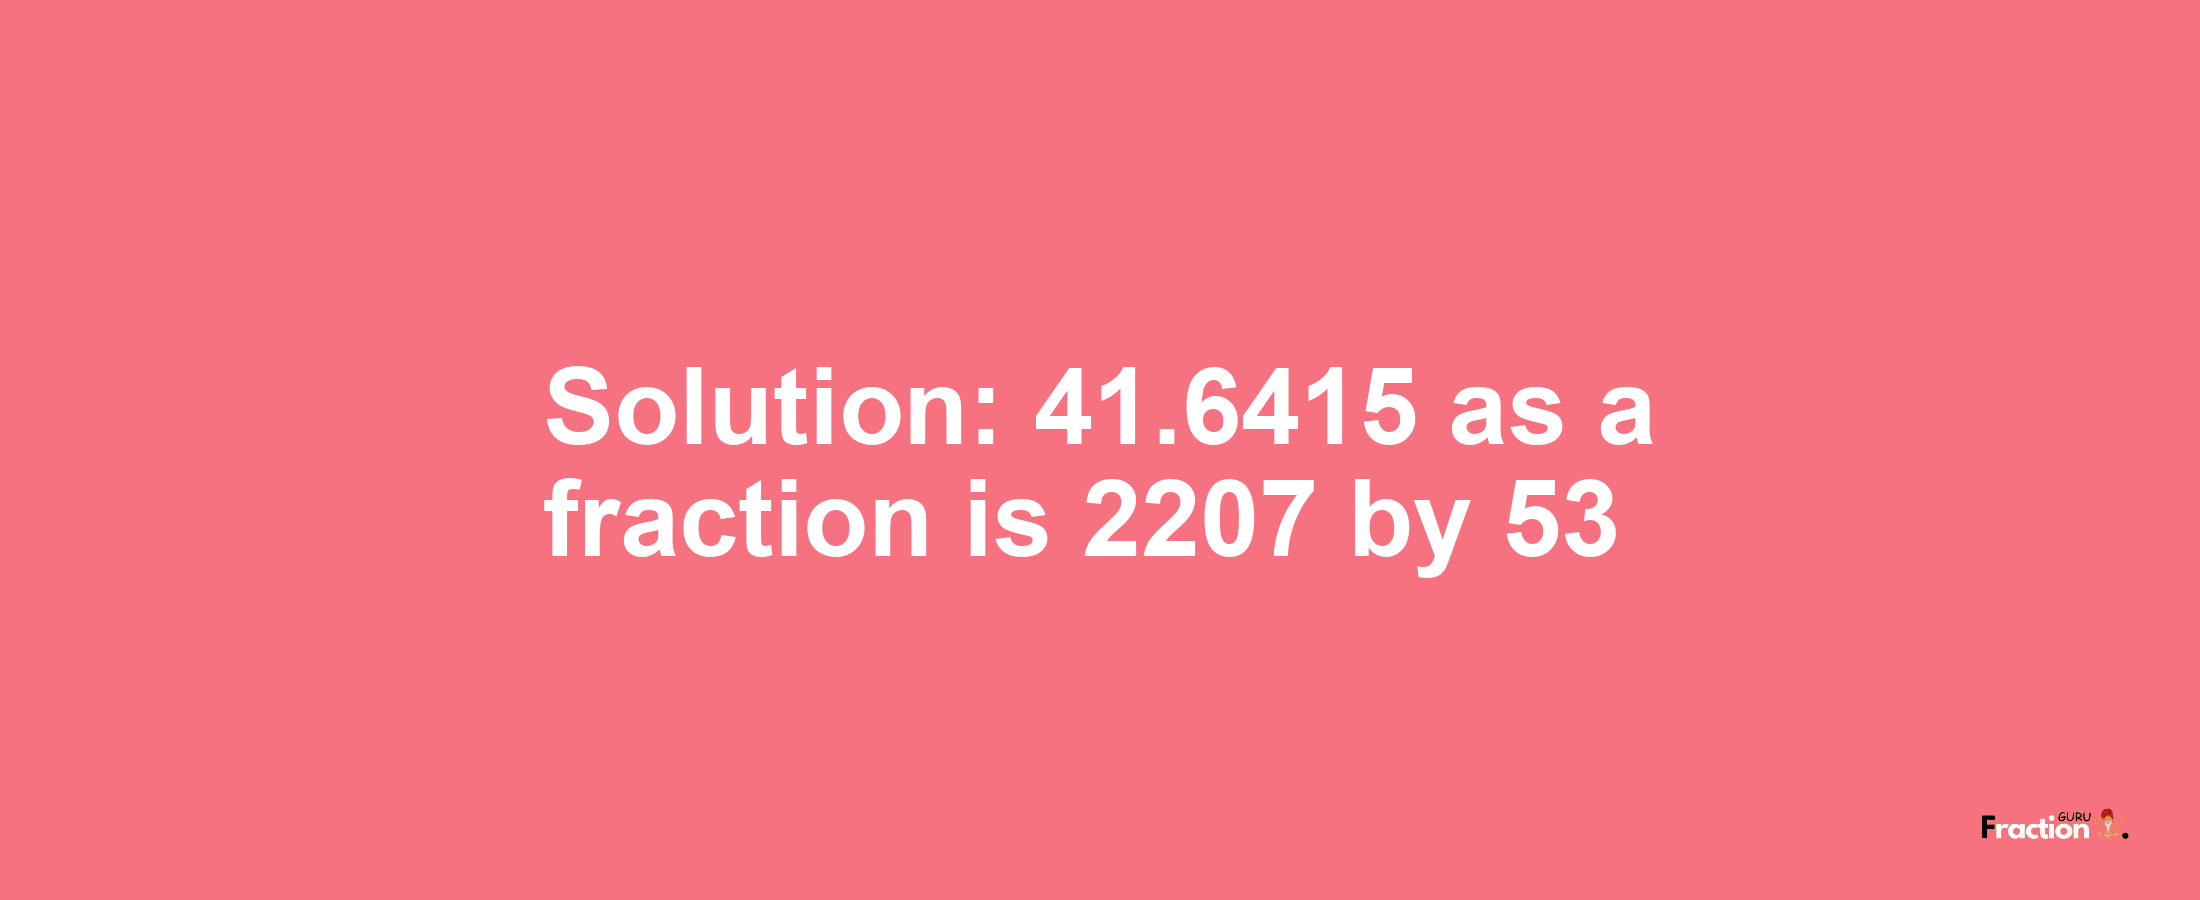 Solution:41.6415 as a fraction is 2207/53